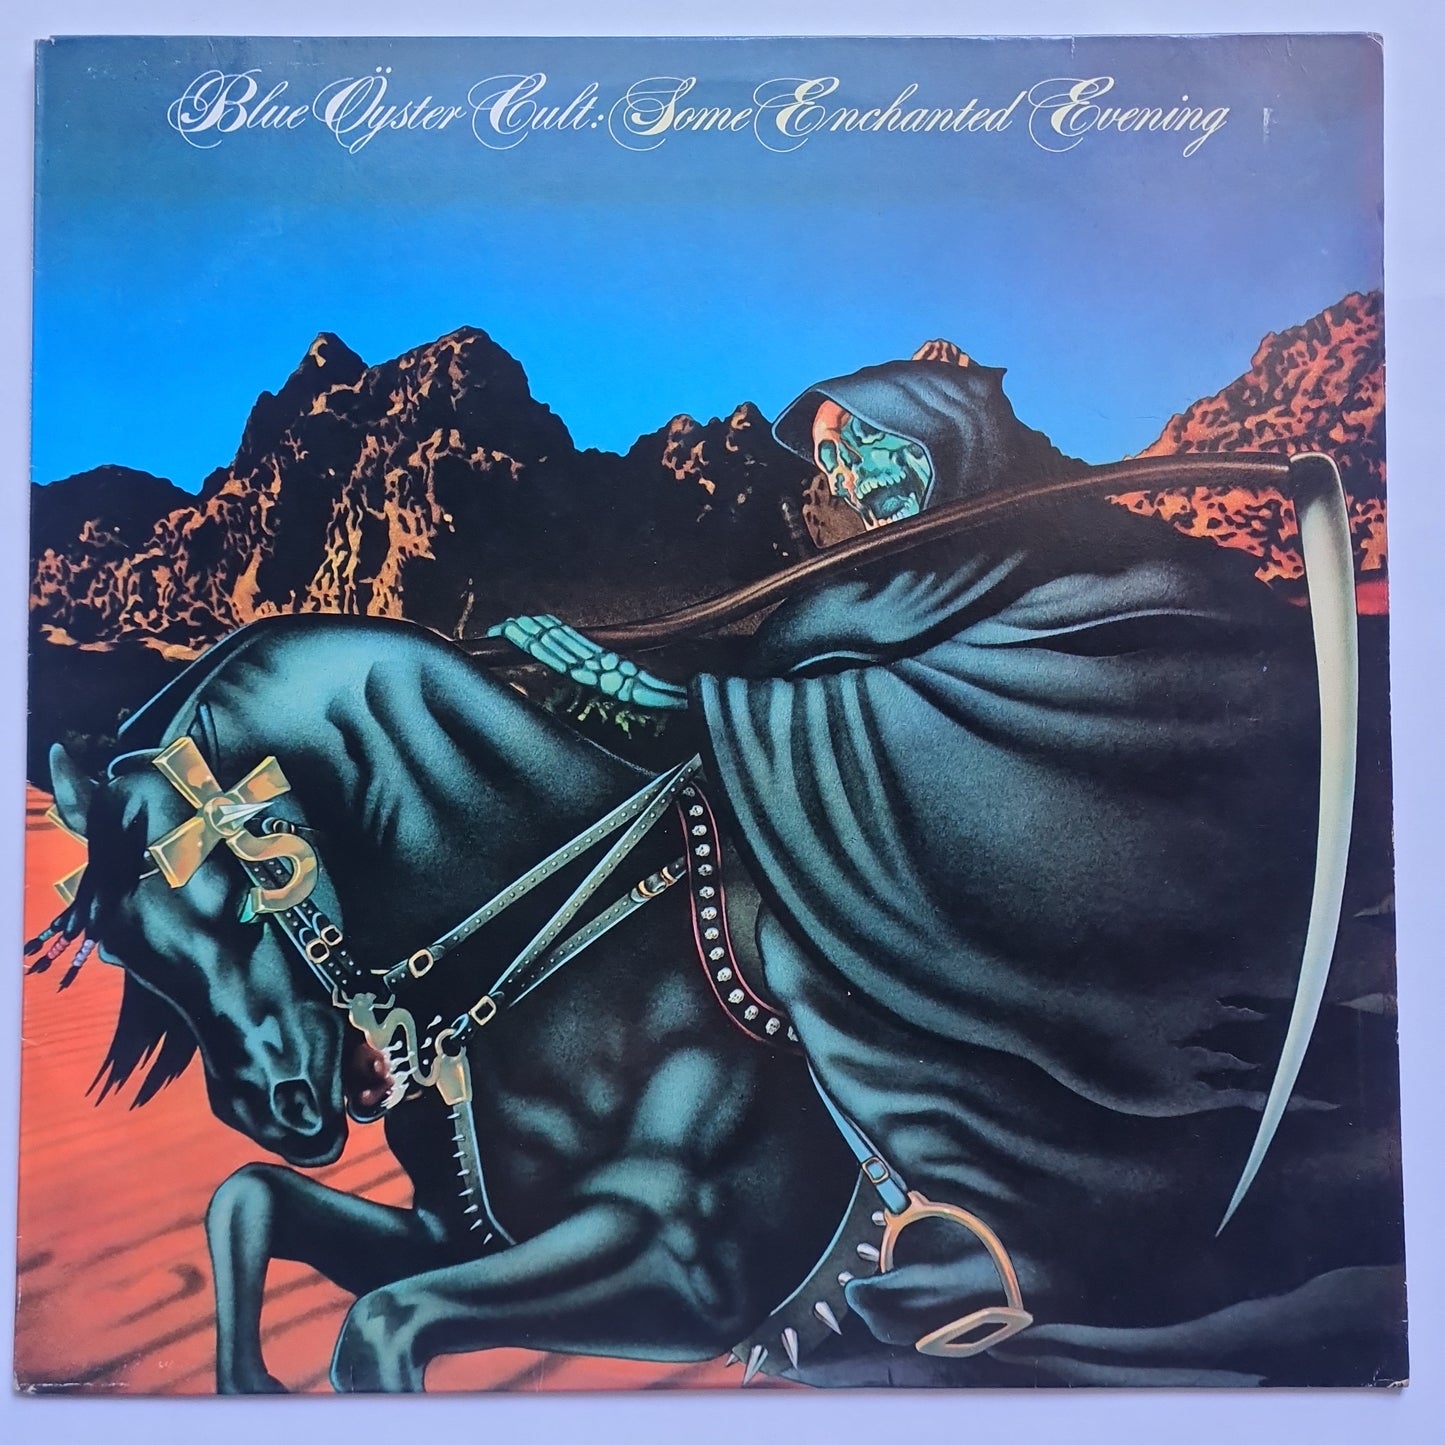 Blue Oyster Cult – Some Enchanted Evening - 1978 - Vinyl Record (Copy)